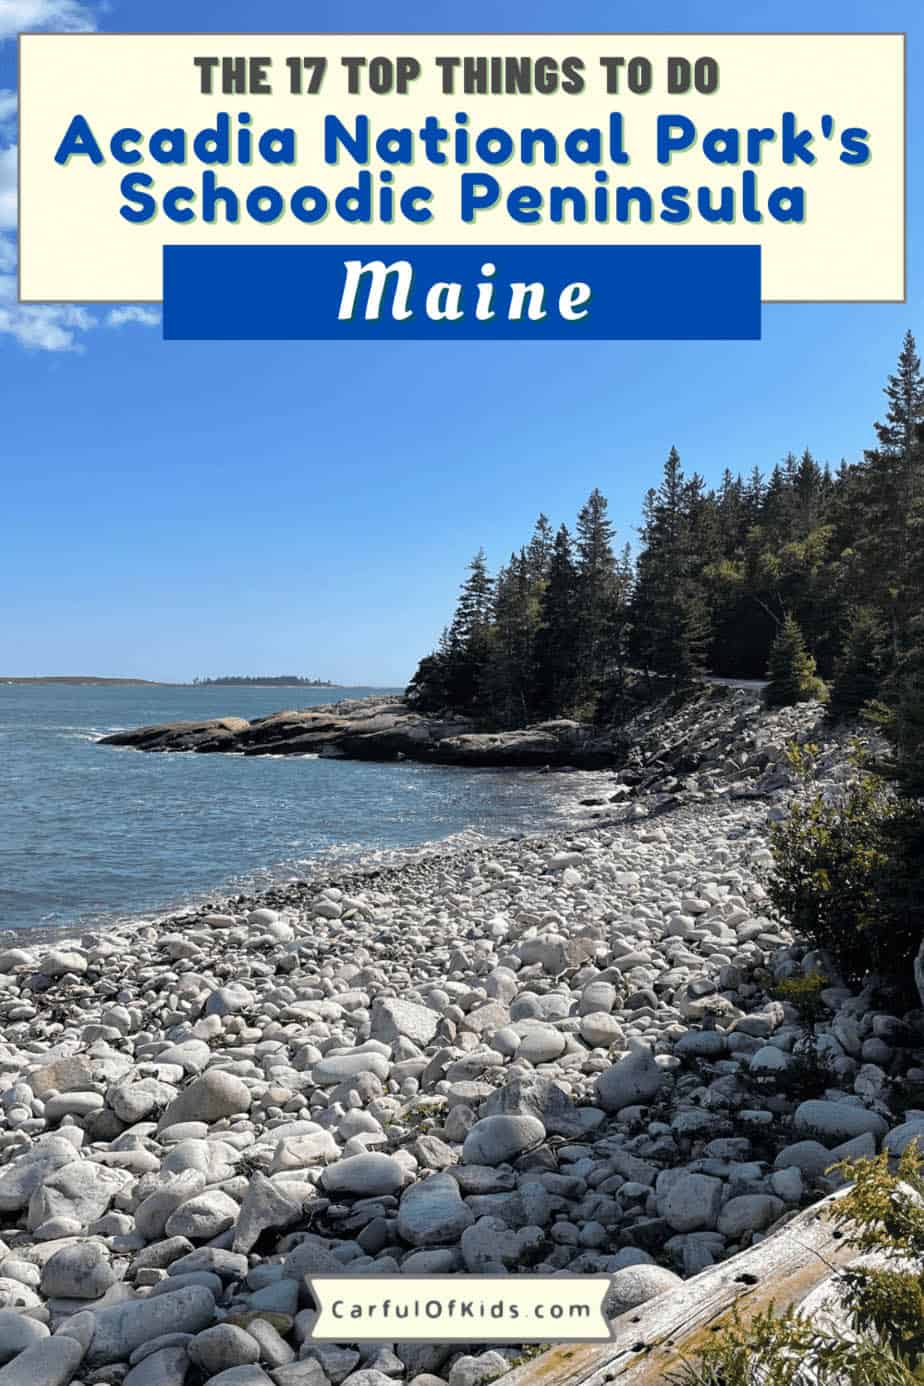 Located across from Mount Desert portion of Acadia National Park, the Schoodic Peninsula offers hiking, camping, epic coastal views and more. What to do at the Schoodic Peninsula | Quieter Part of Acadia National Park #Maine